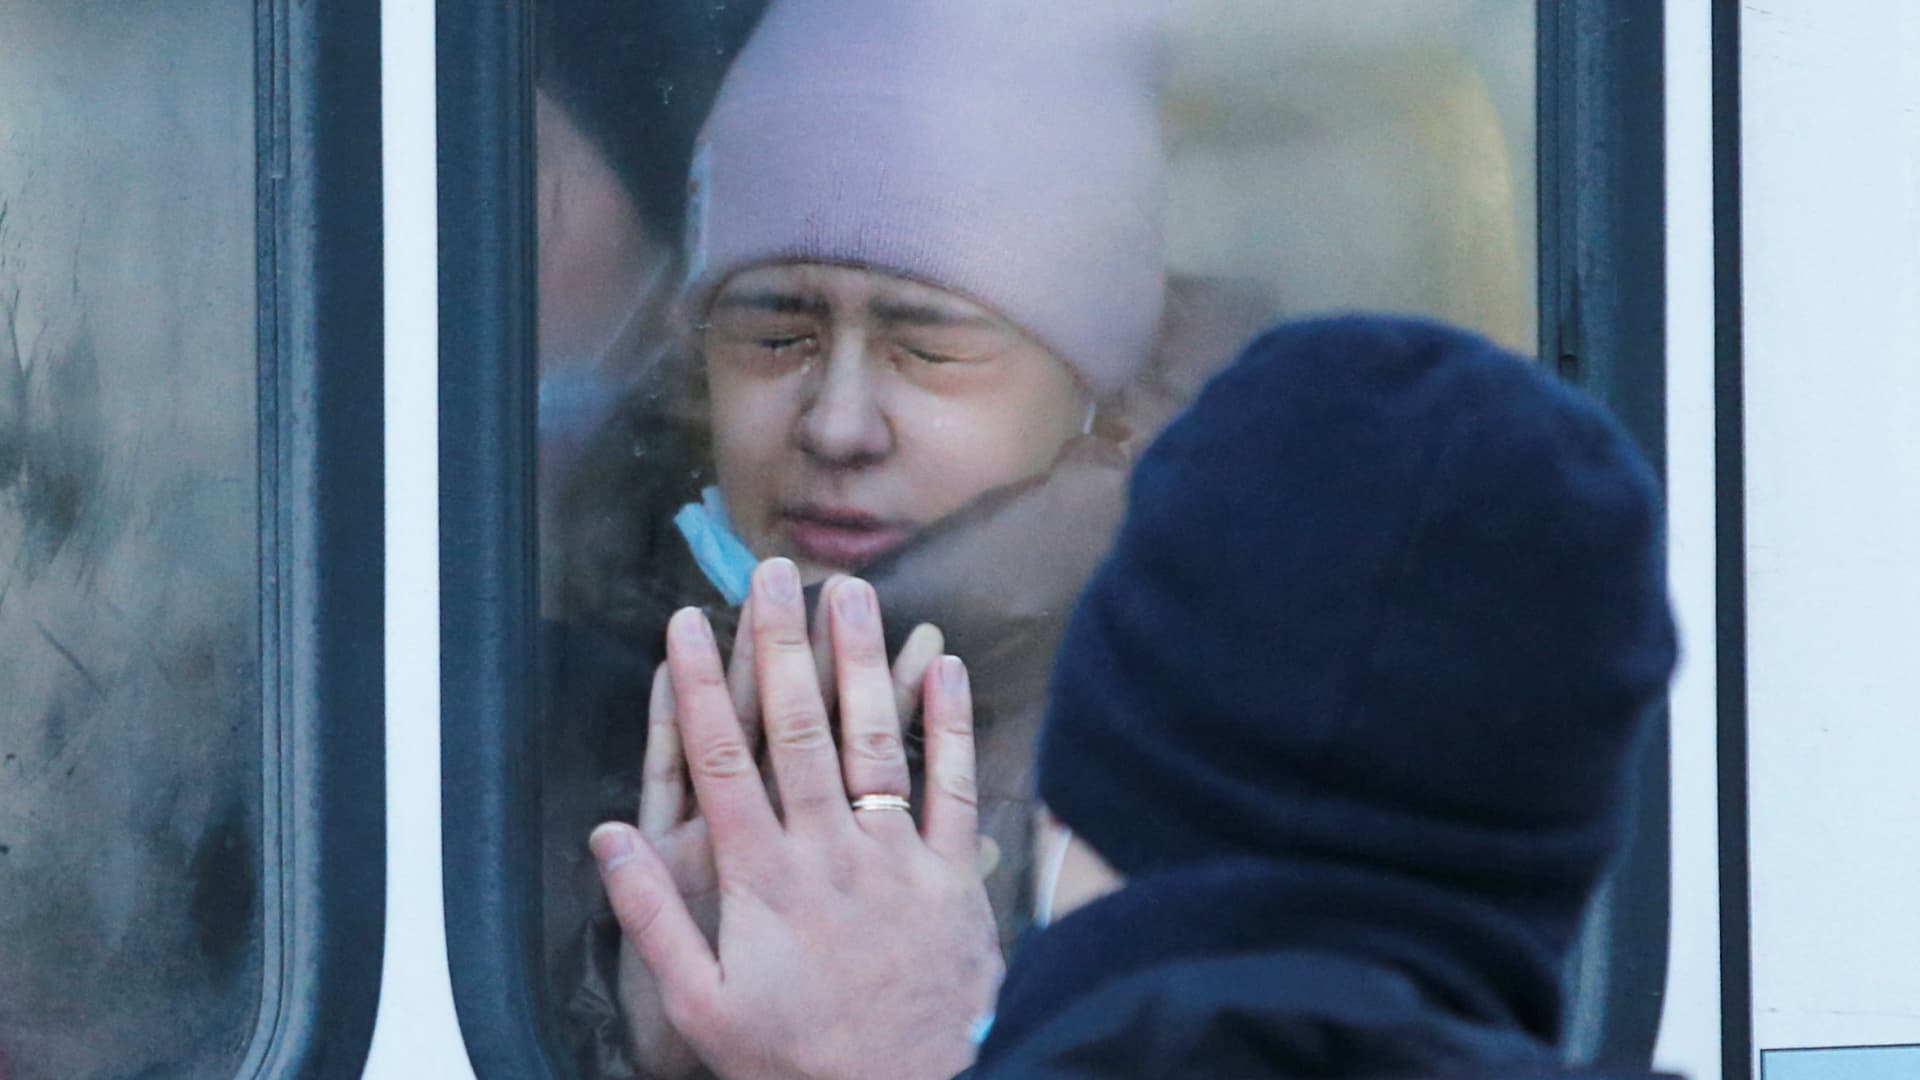 A woman says goodbye to her father through a bus window during the evacuation of local residents to Russia, in the rebel-controlled city of Donetsk, Ukraine February 19, 2022.